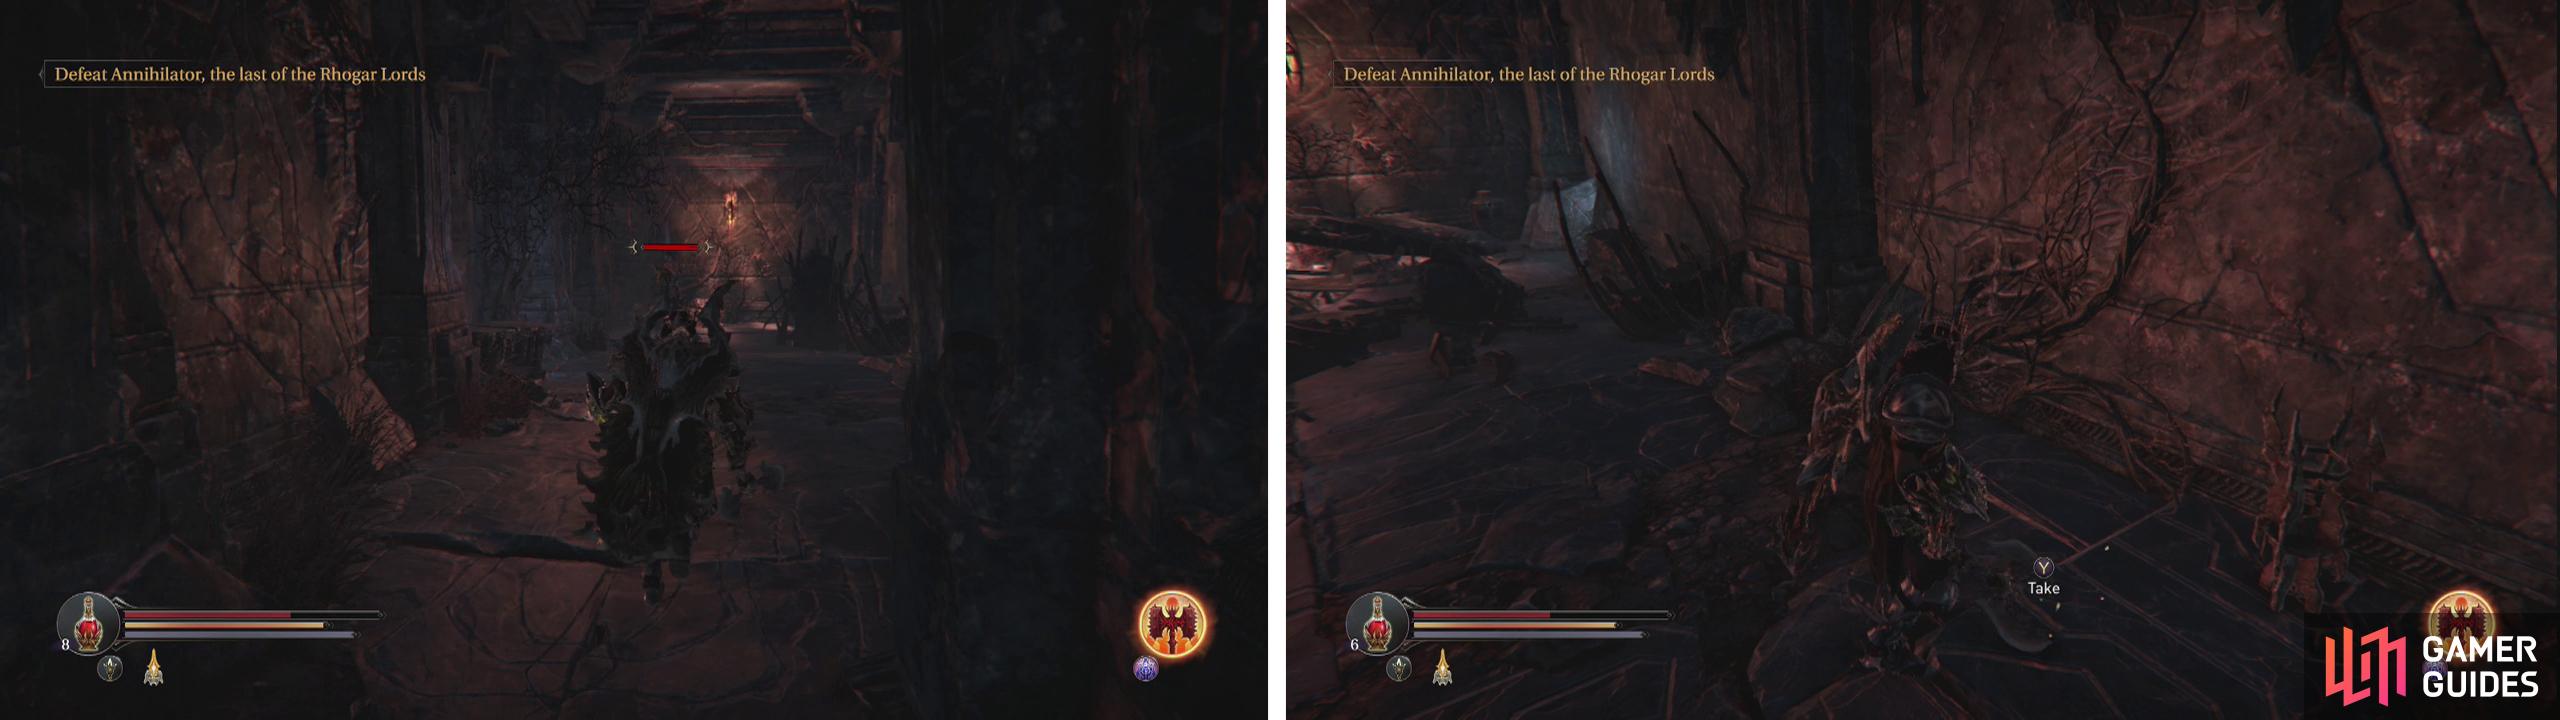 Kill the Spellcaster (left) and look for the well hidden Audio Note nearby (right).